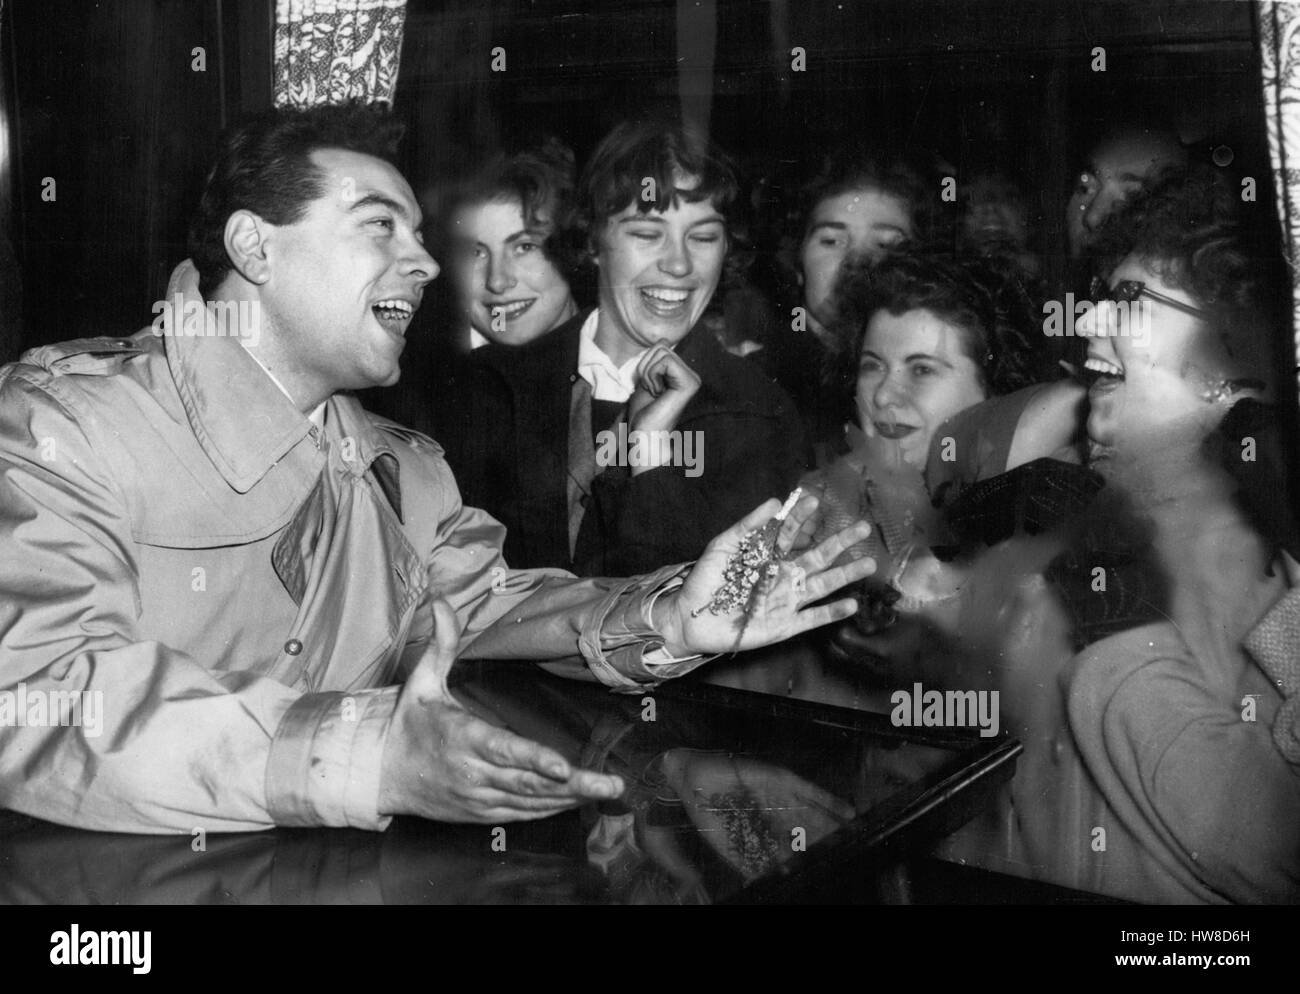 Nov. 15, 1957 - 15-11-57 Girl fans mob Mario Lanza when he arrives in London Ã¢â‚¬' Screaming fans broke down platform barriers and fought with police to mob Mario Lanza when he arrived at Victoria Station last night. In the mad heaving rush, their idol was knocked down, but he picked himself up smiling. The Hollywood star is here to sing at the Royal Variety Show on Monday and to appear on TV on Sunday. Photo Shows: Hero worship is displayed on the faces of these girls as he sings to them from the carriage of the train on his arrival at Victoria Station last night. (Credit Image: © Keystone Stock Photo